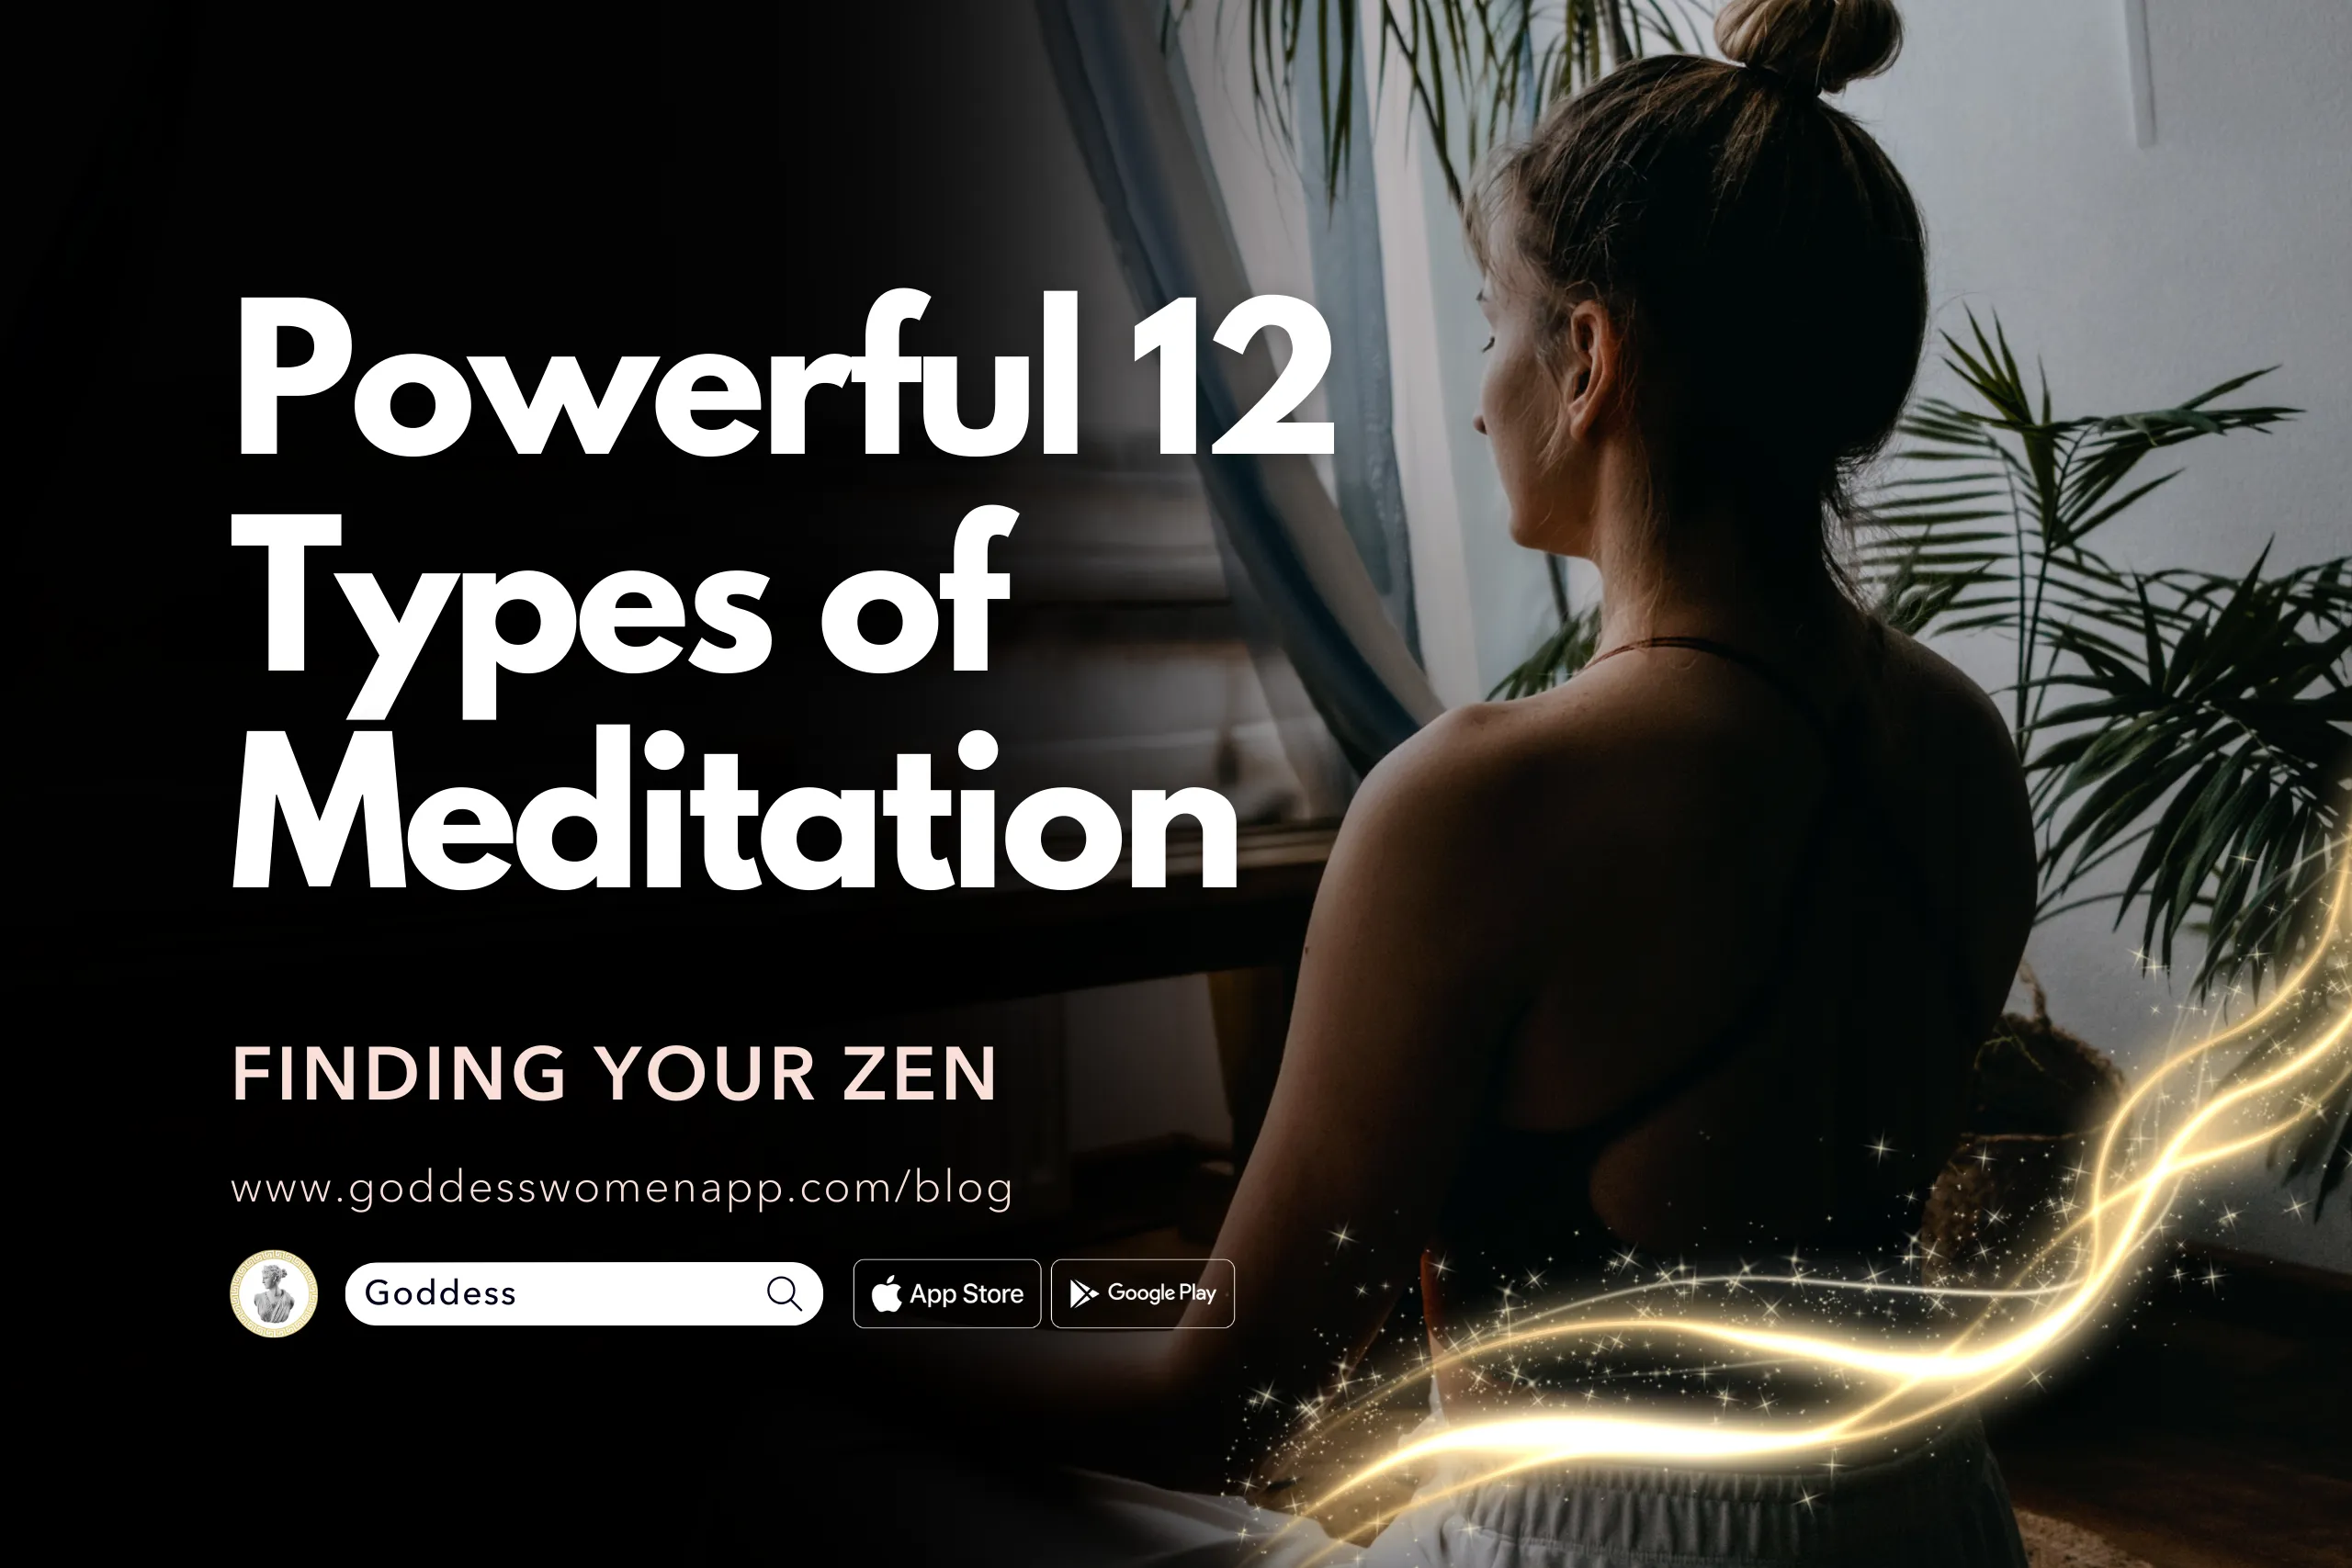 Powerful 12 Types of Meditation: Finding Your Zen